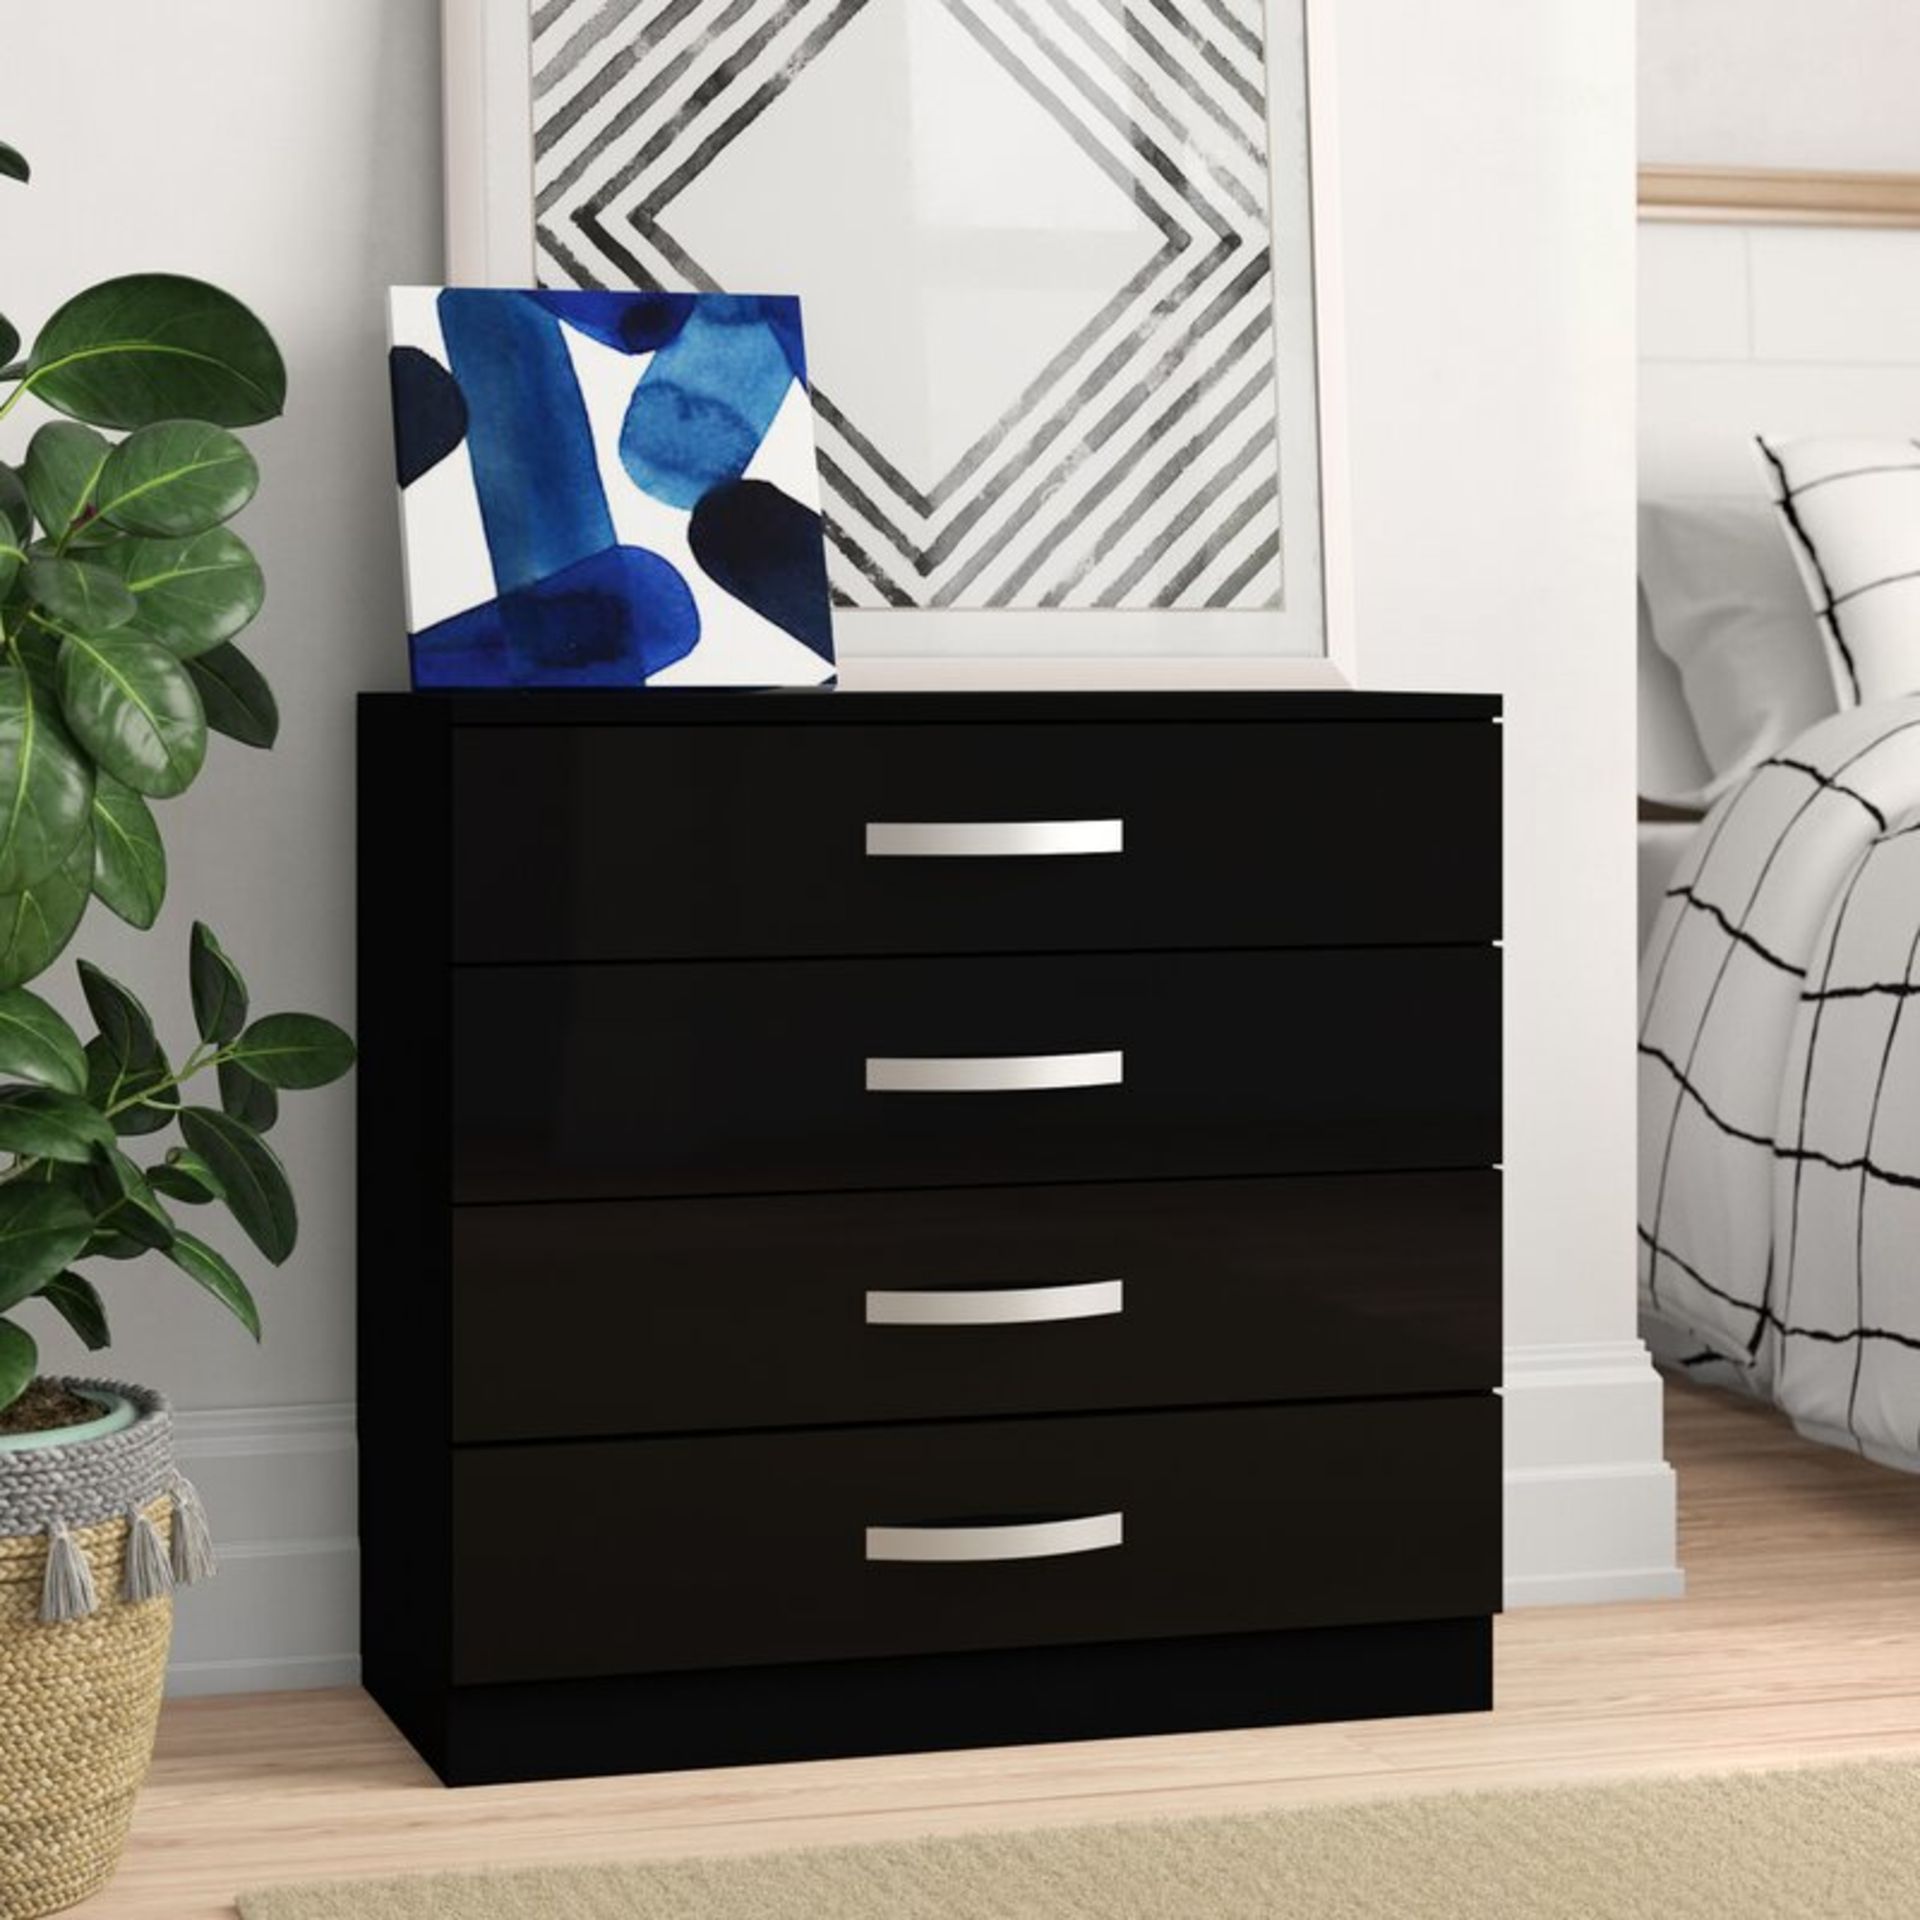 Joselyn High Gloss 4 Drawer Chest - RRP 99.99